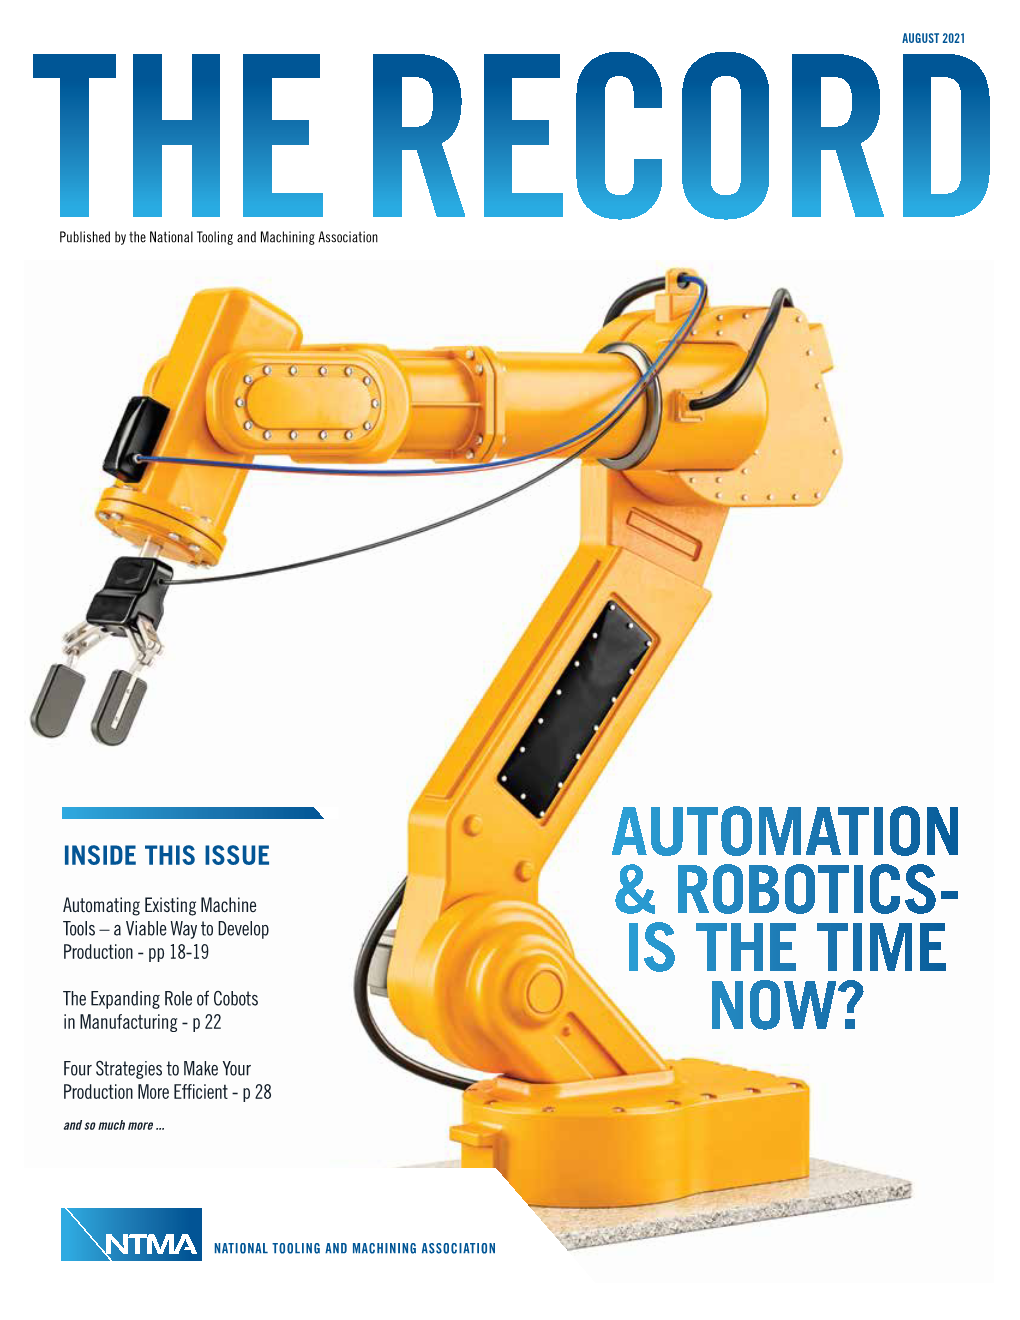 Automation & Robotics- Is the Time Now?